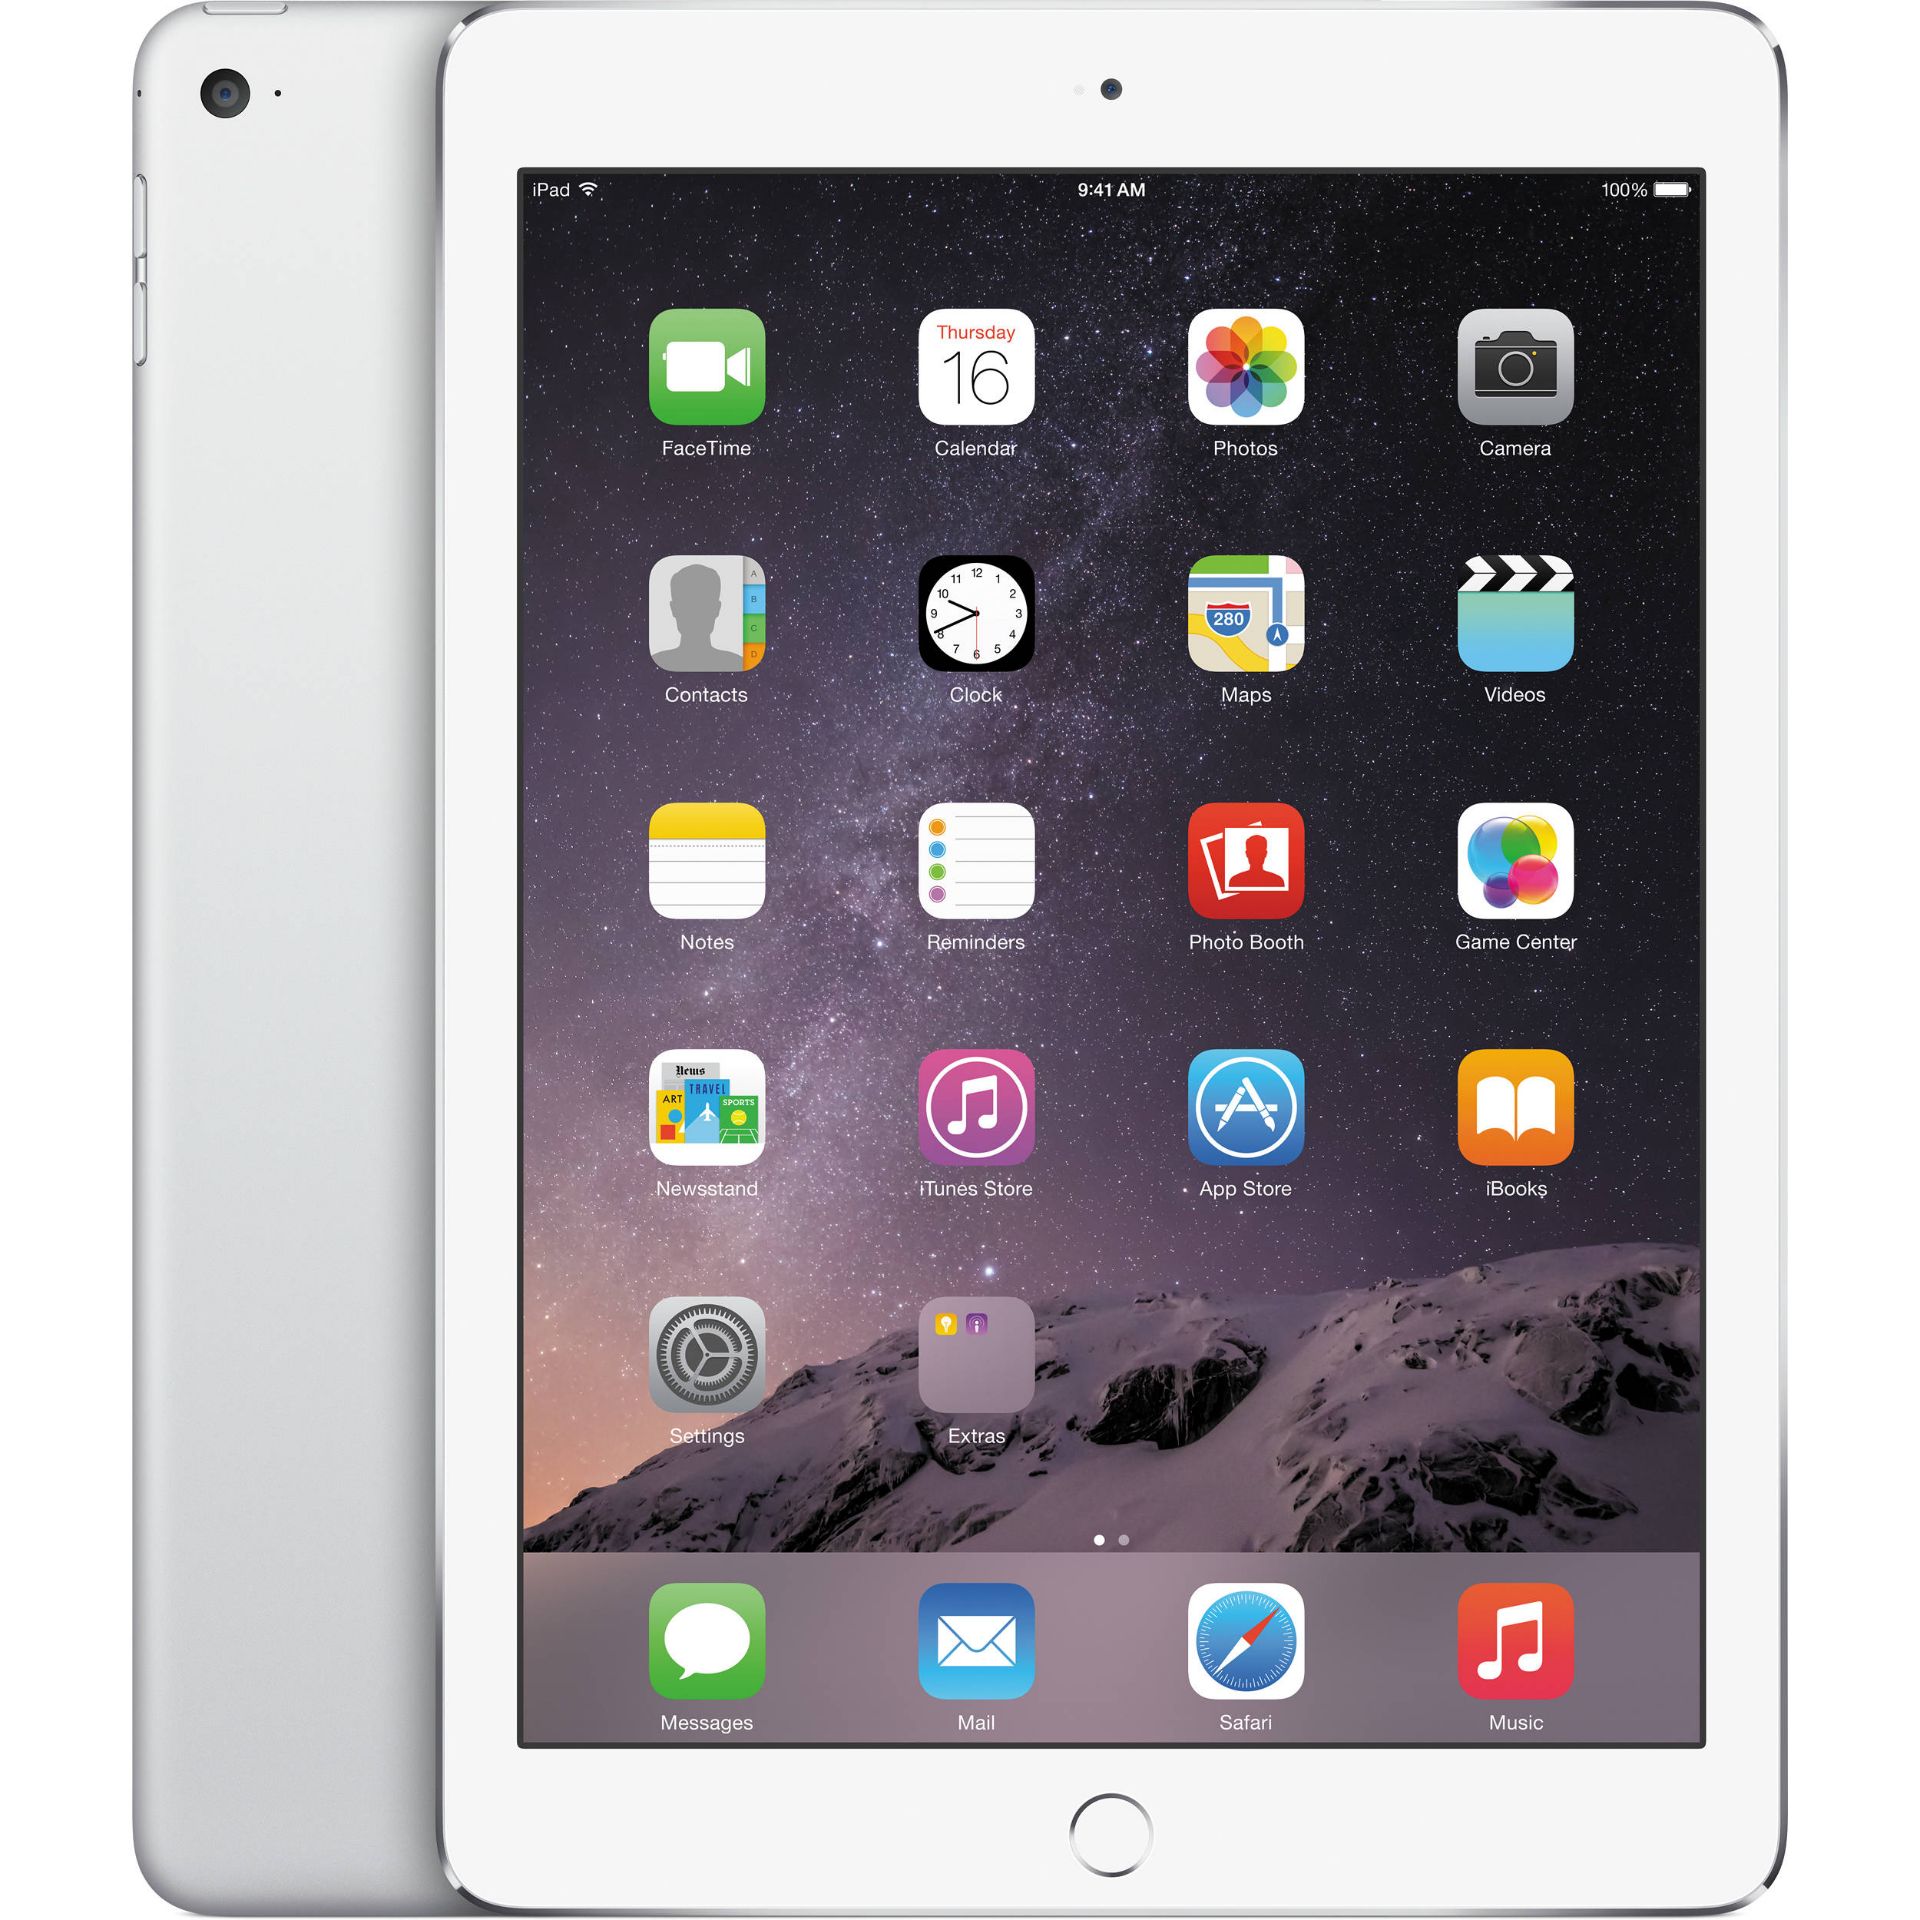 V Grade A Apple iPad Air 2 64GB Silver - Wi-Fi - In Generic Box - With Apple Accessories X 2 YOUR